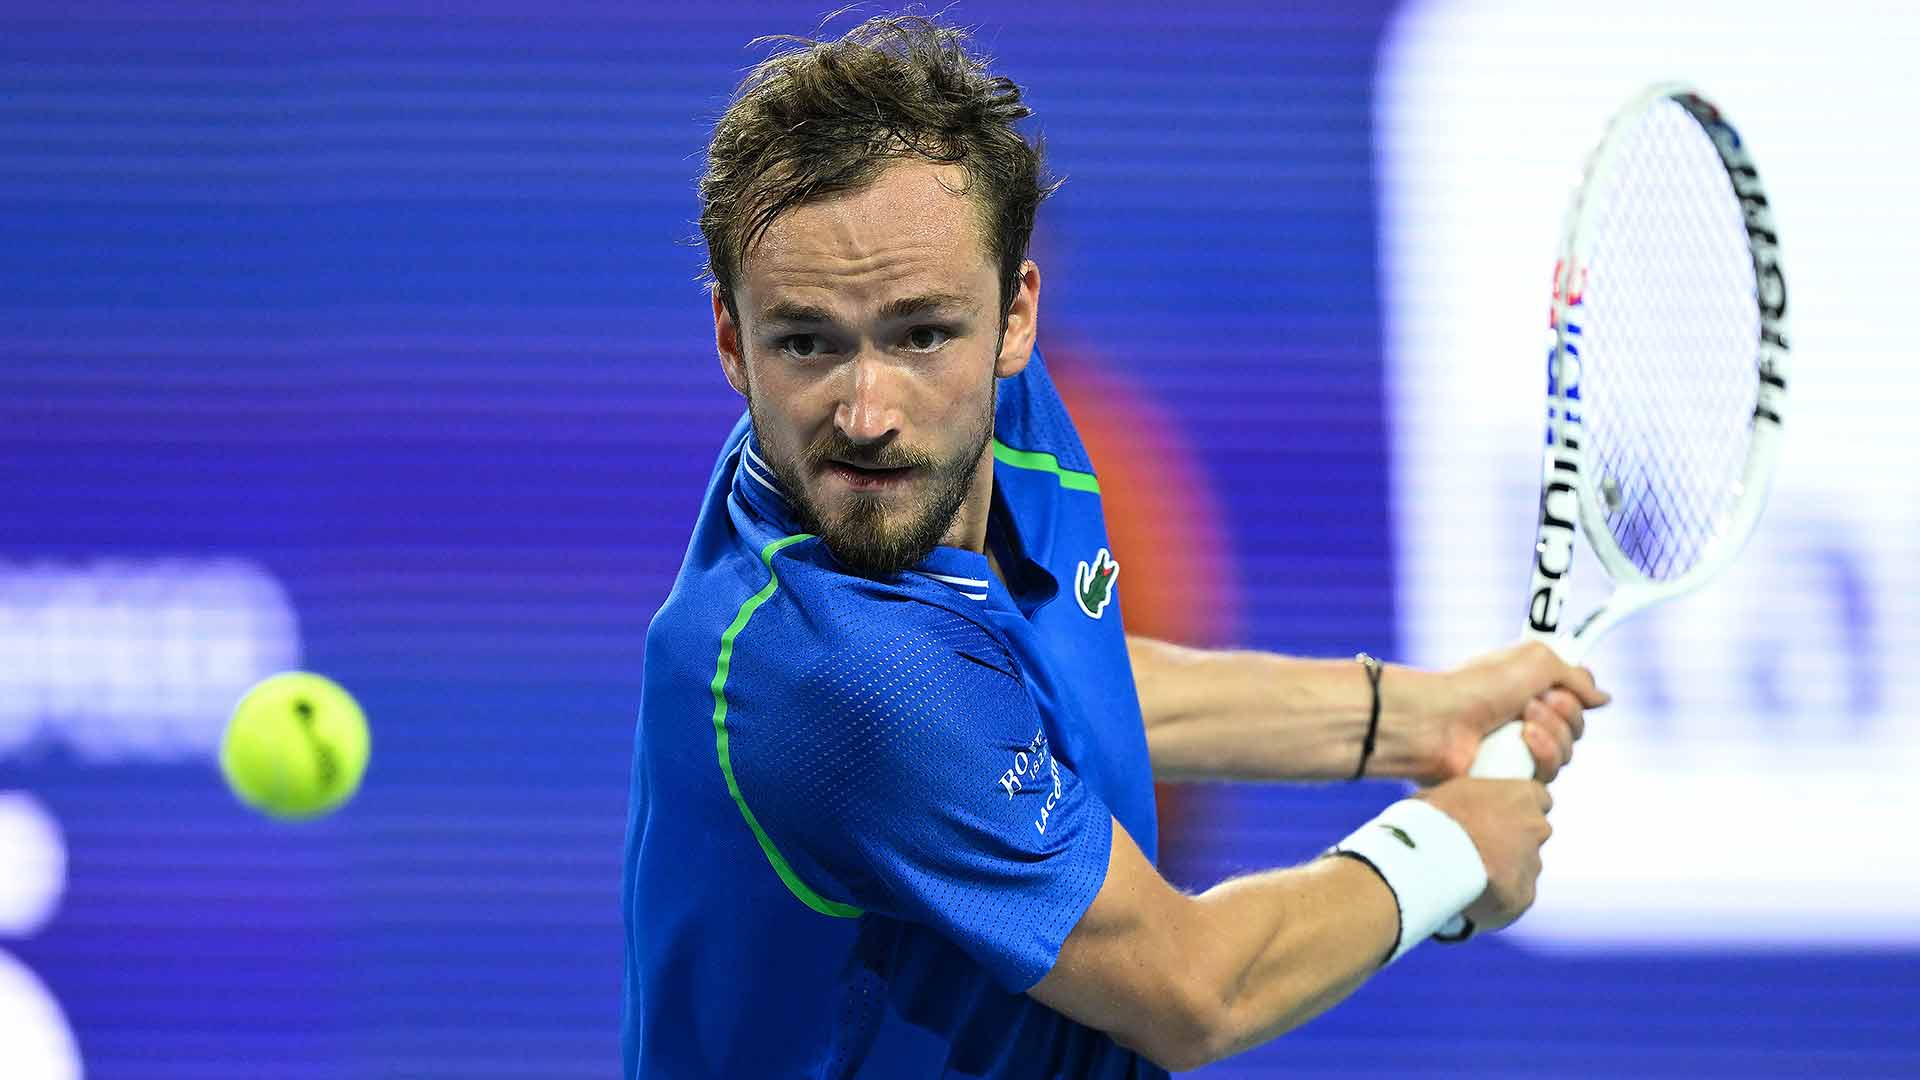 Daniil Medvedev has won 20 of his past 21 matches.